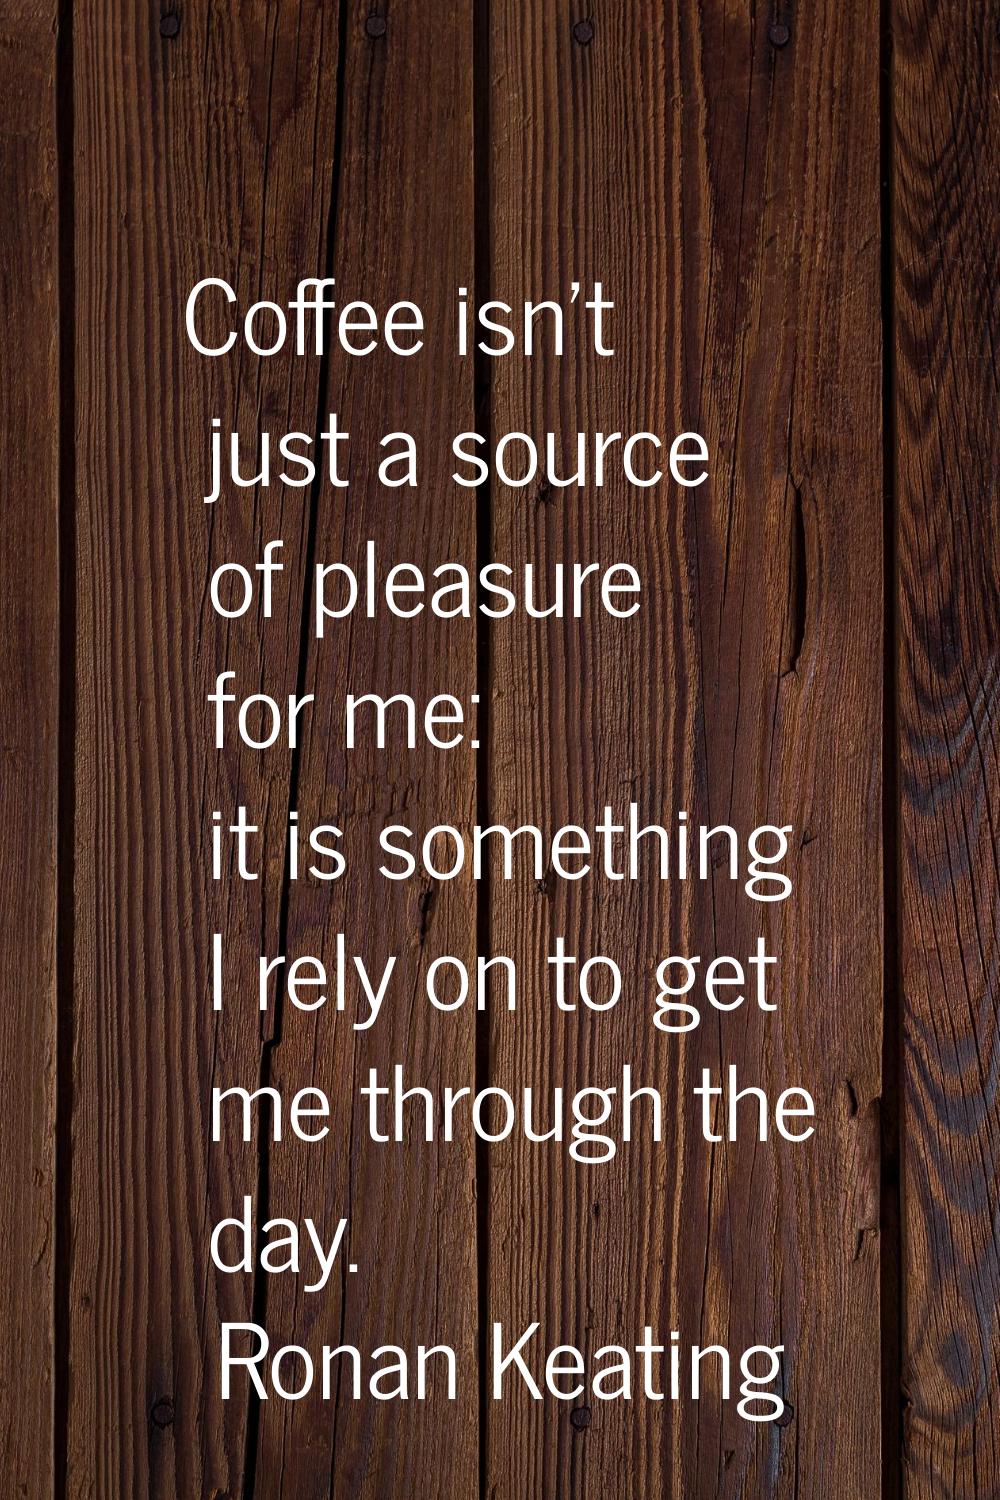 Coffee isn't just a source of pleasure for me: it is something I rely on to get me through the day.